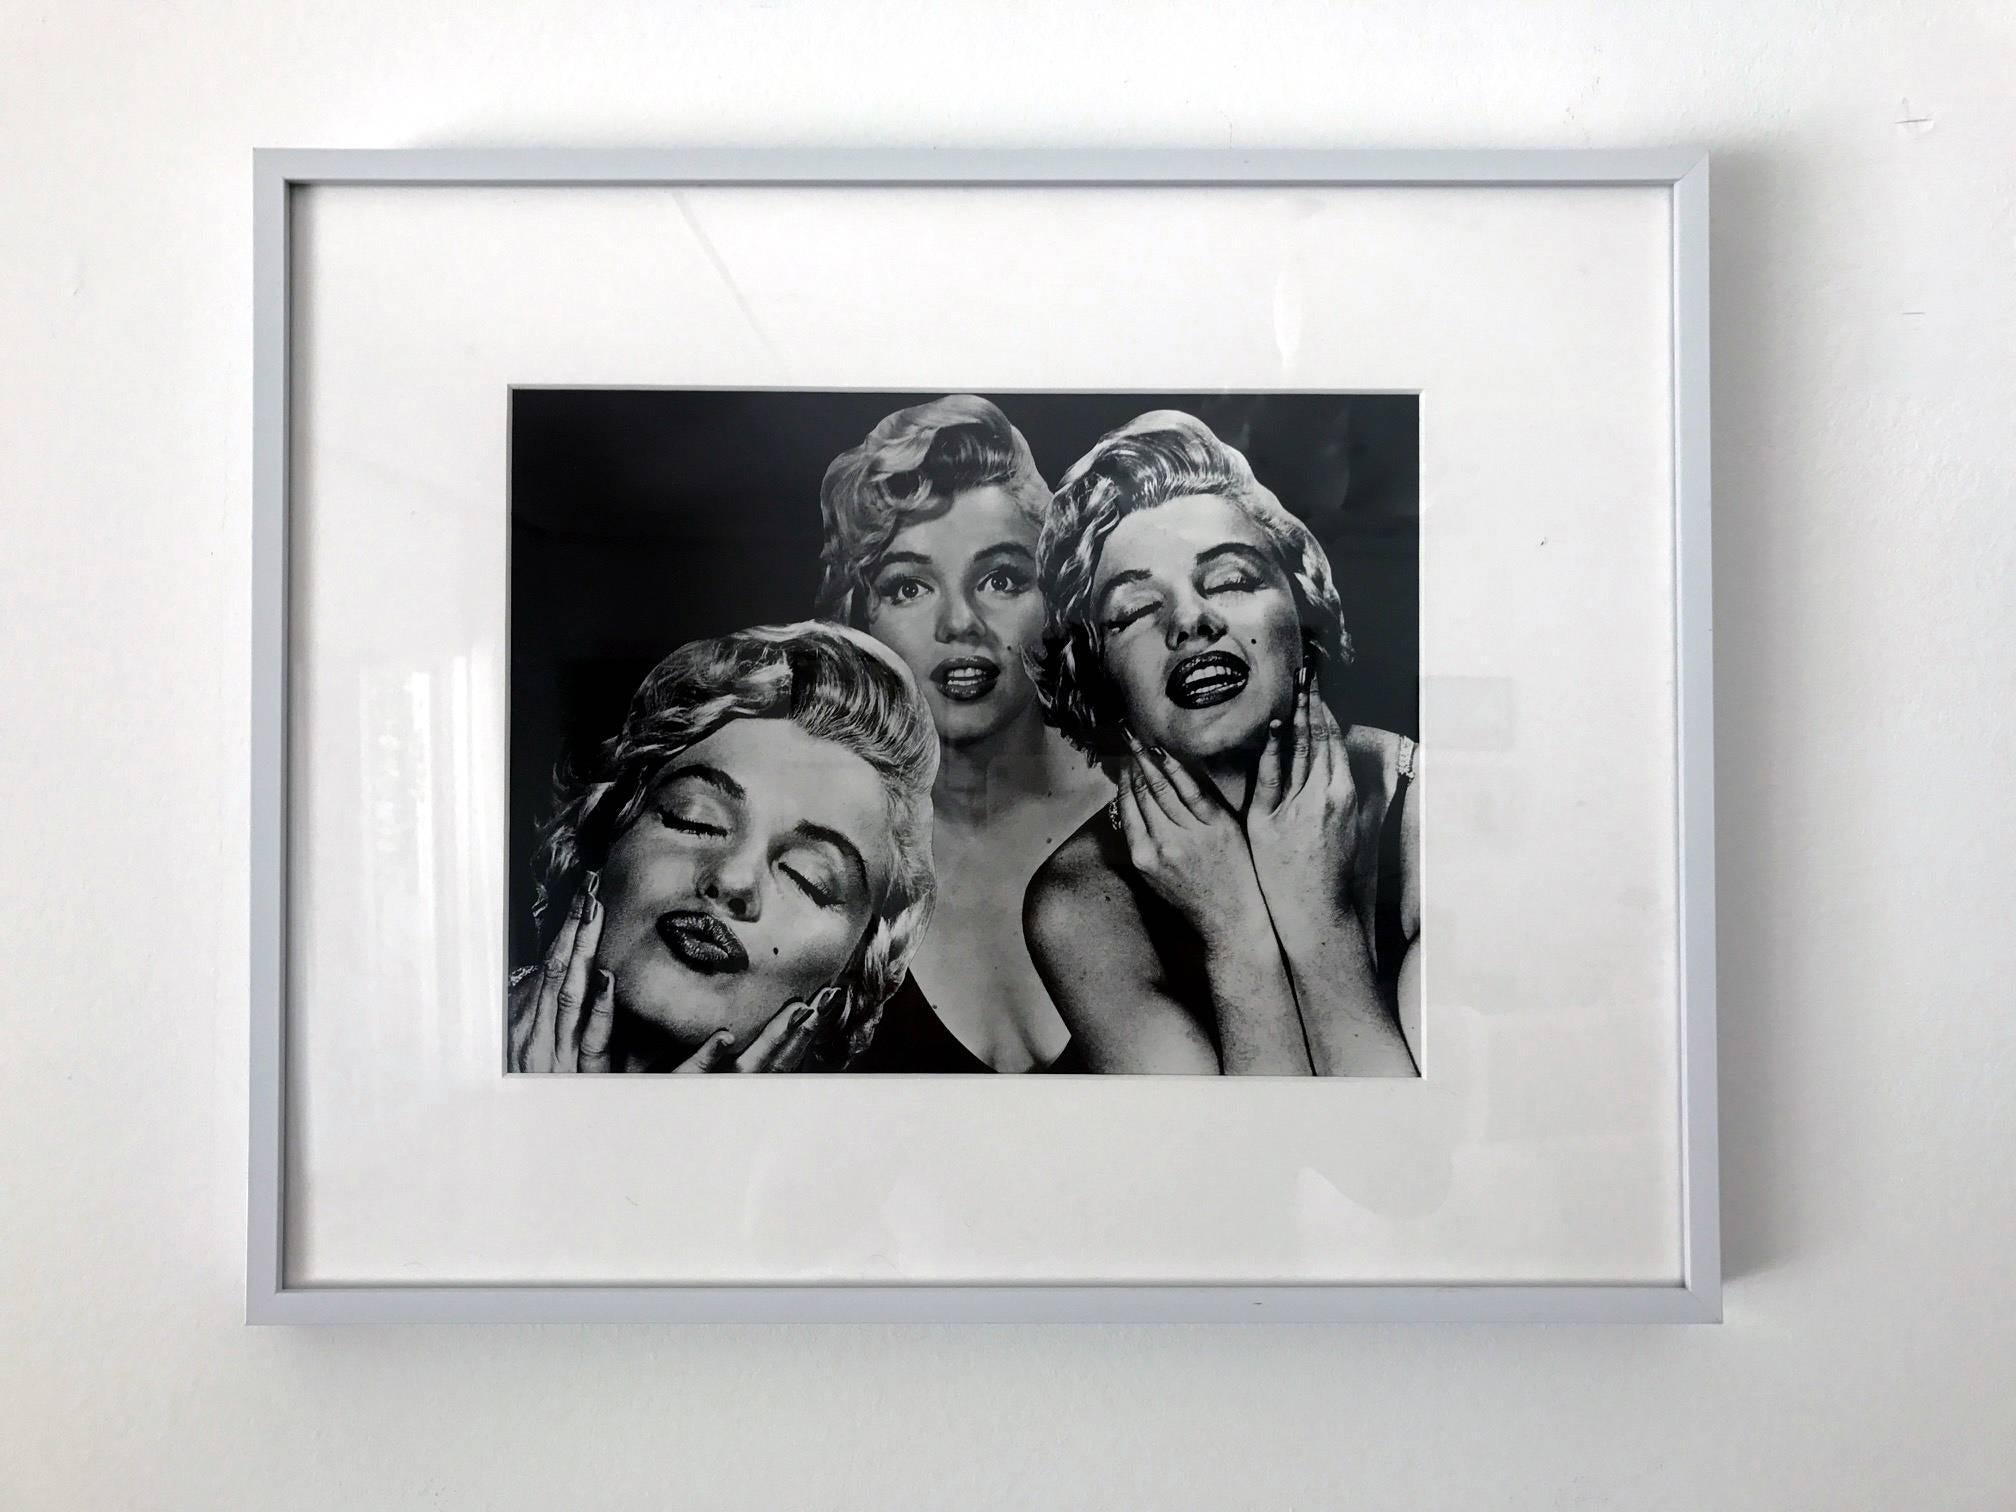 Modern Marilyn Monroe Photograph by Philippe Halsman For Sale